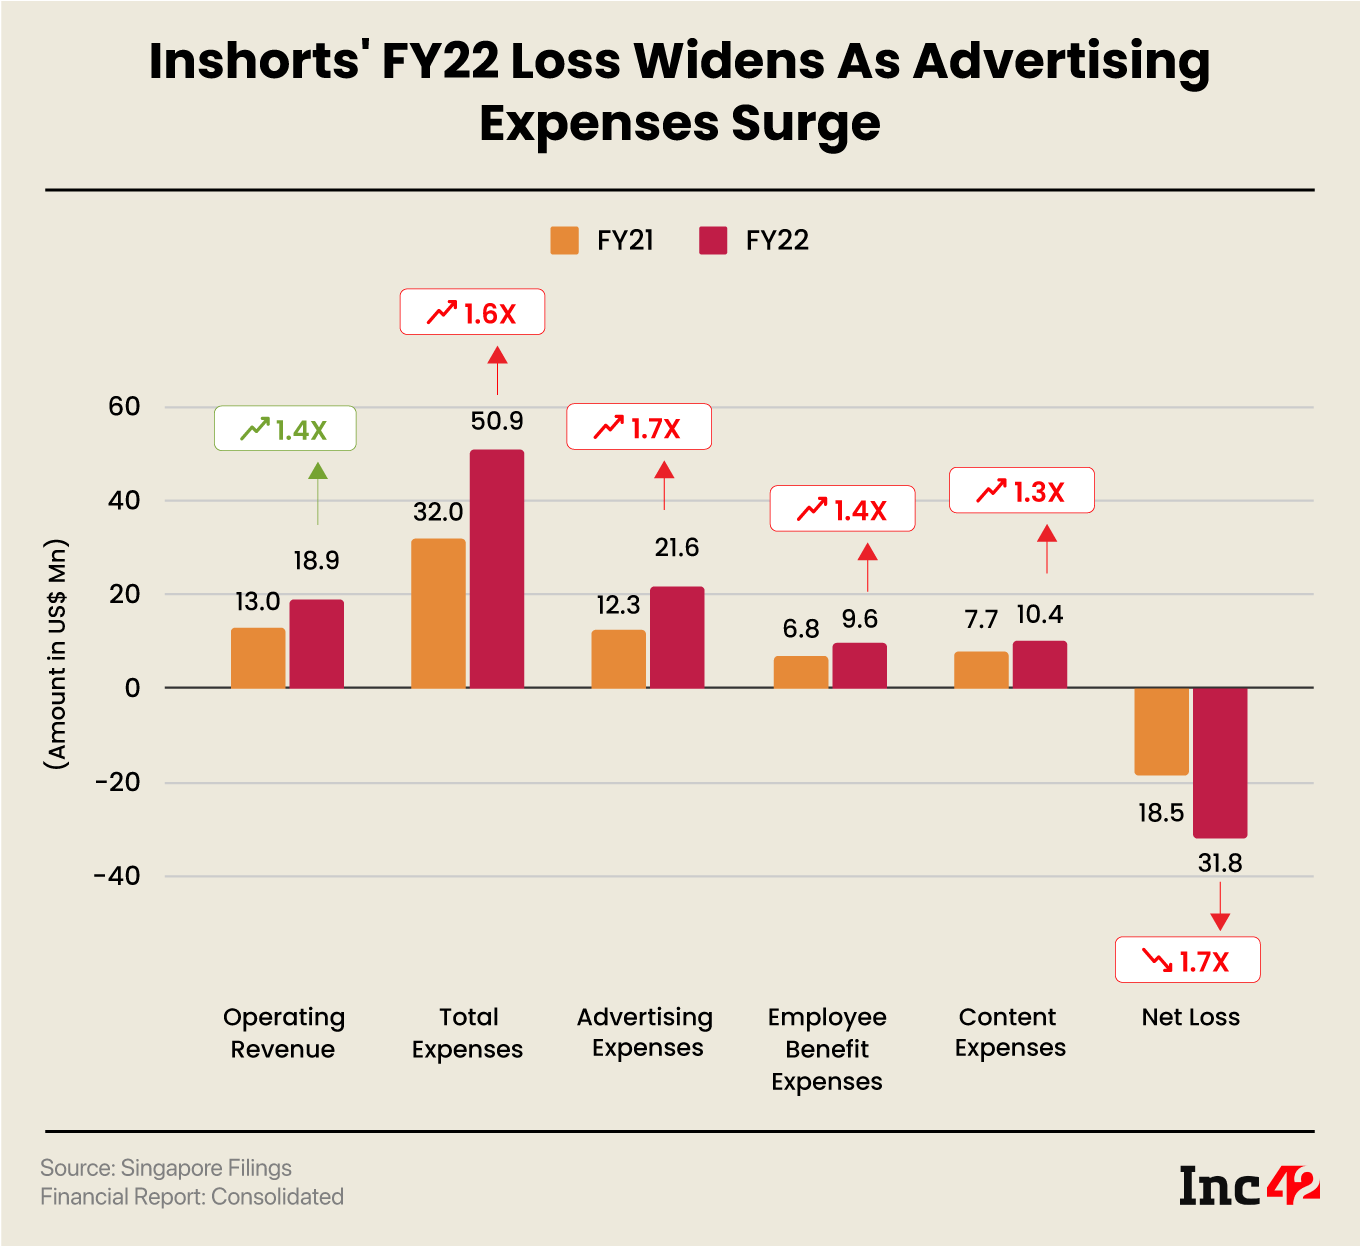 Inshorts’ FY22 Loss Widens 1.7X YoY To $31.8 Mn As Advertising Expenses Surge To $22 Mn